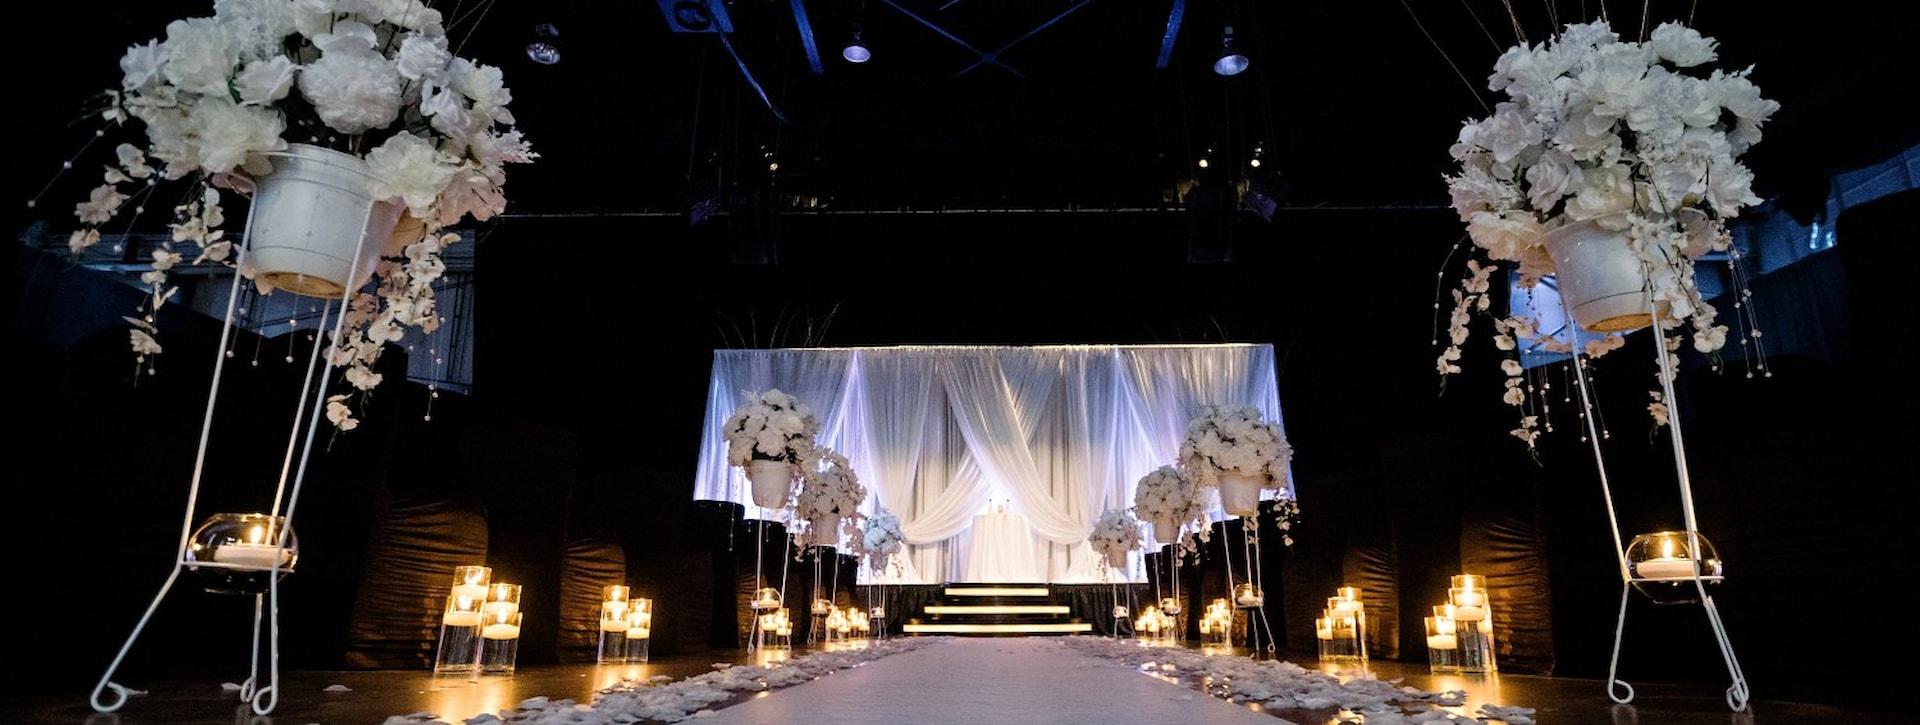 Wedding Ceremony aisle and stage at The Crane Bay Event Venue in Downtown Indianapolis